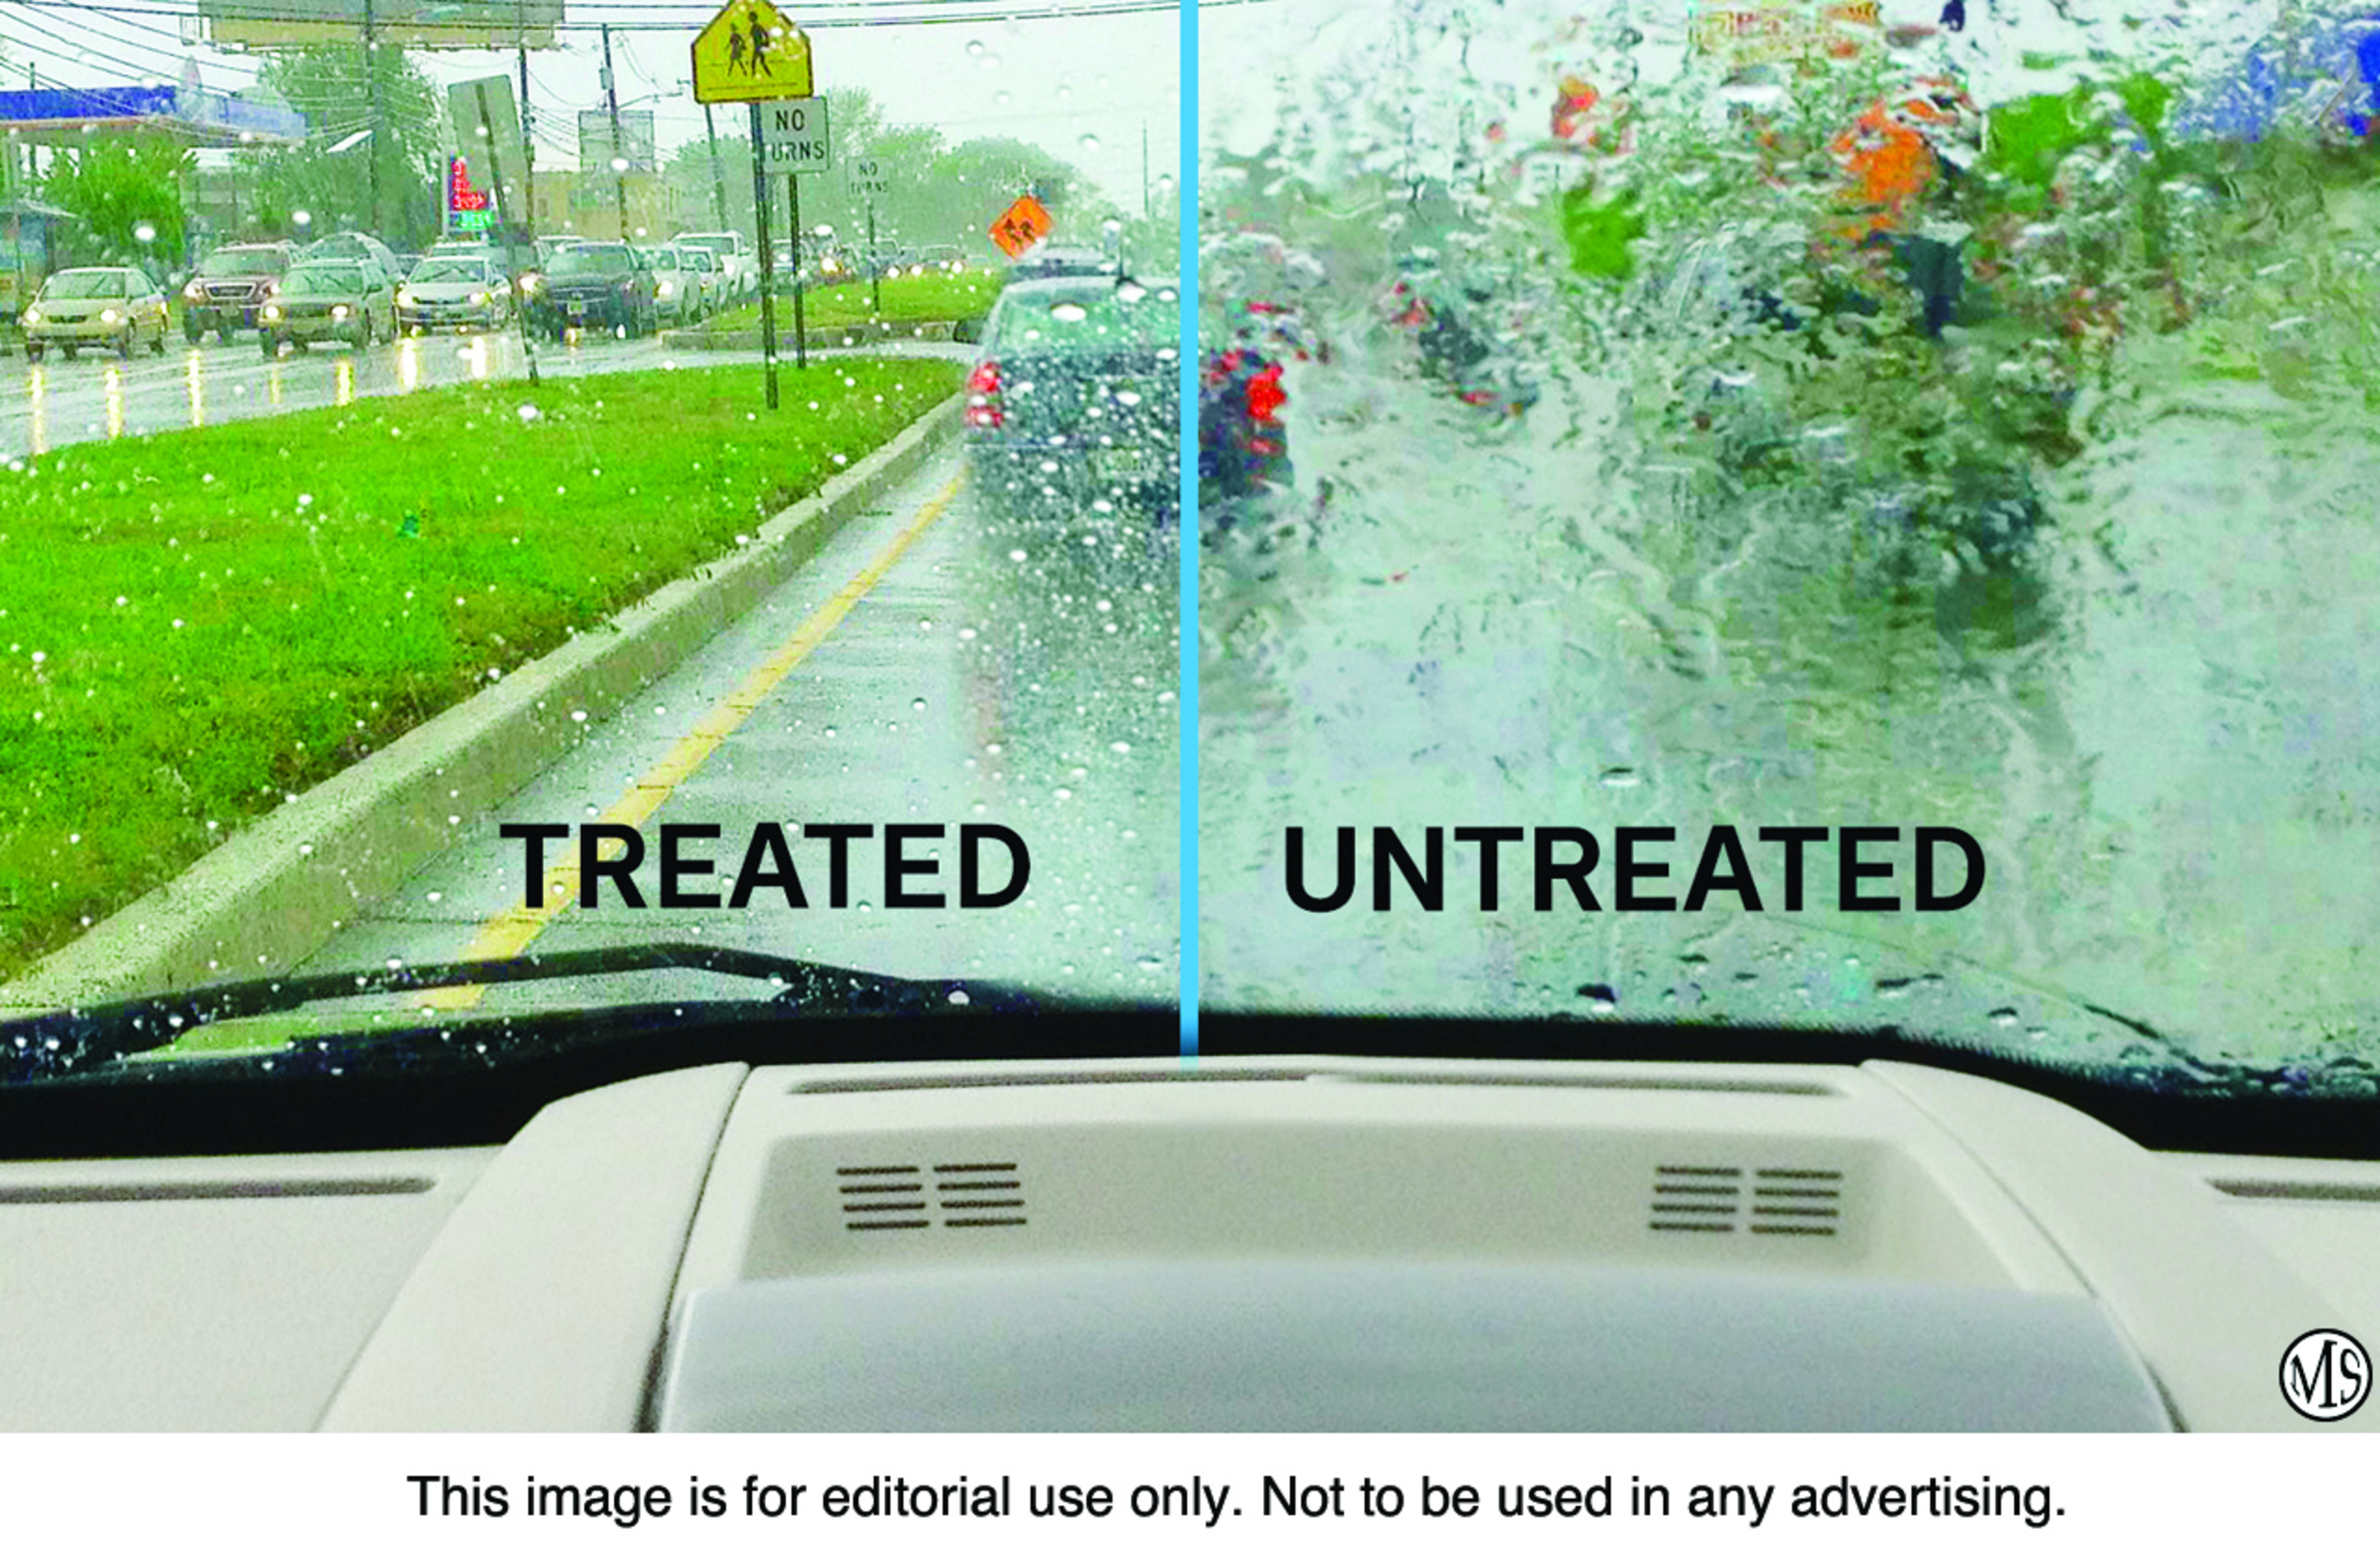 Treated windshields help to prevent rain from obscuring driver vision. (PRNewsFoto/Philips)